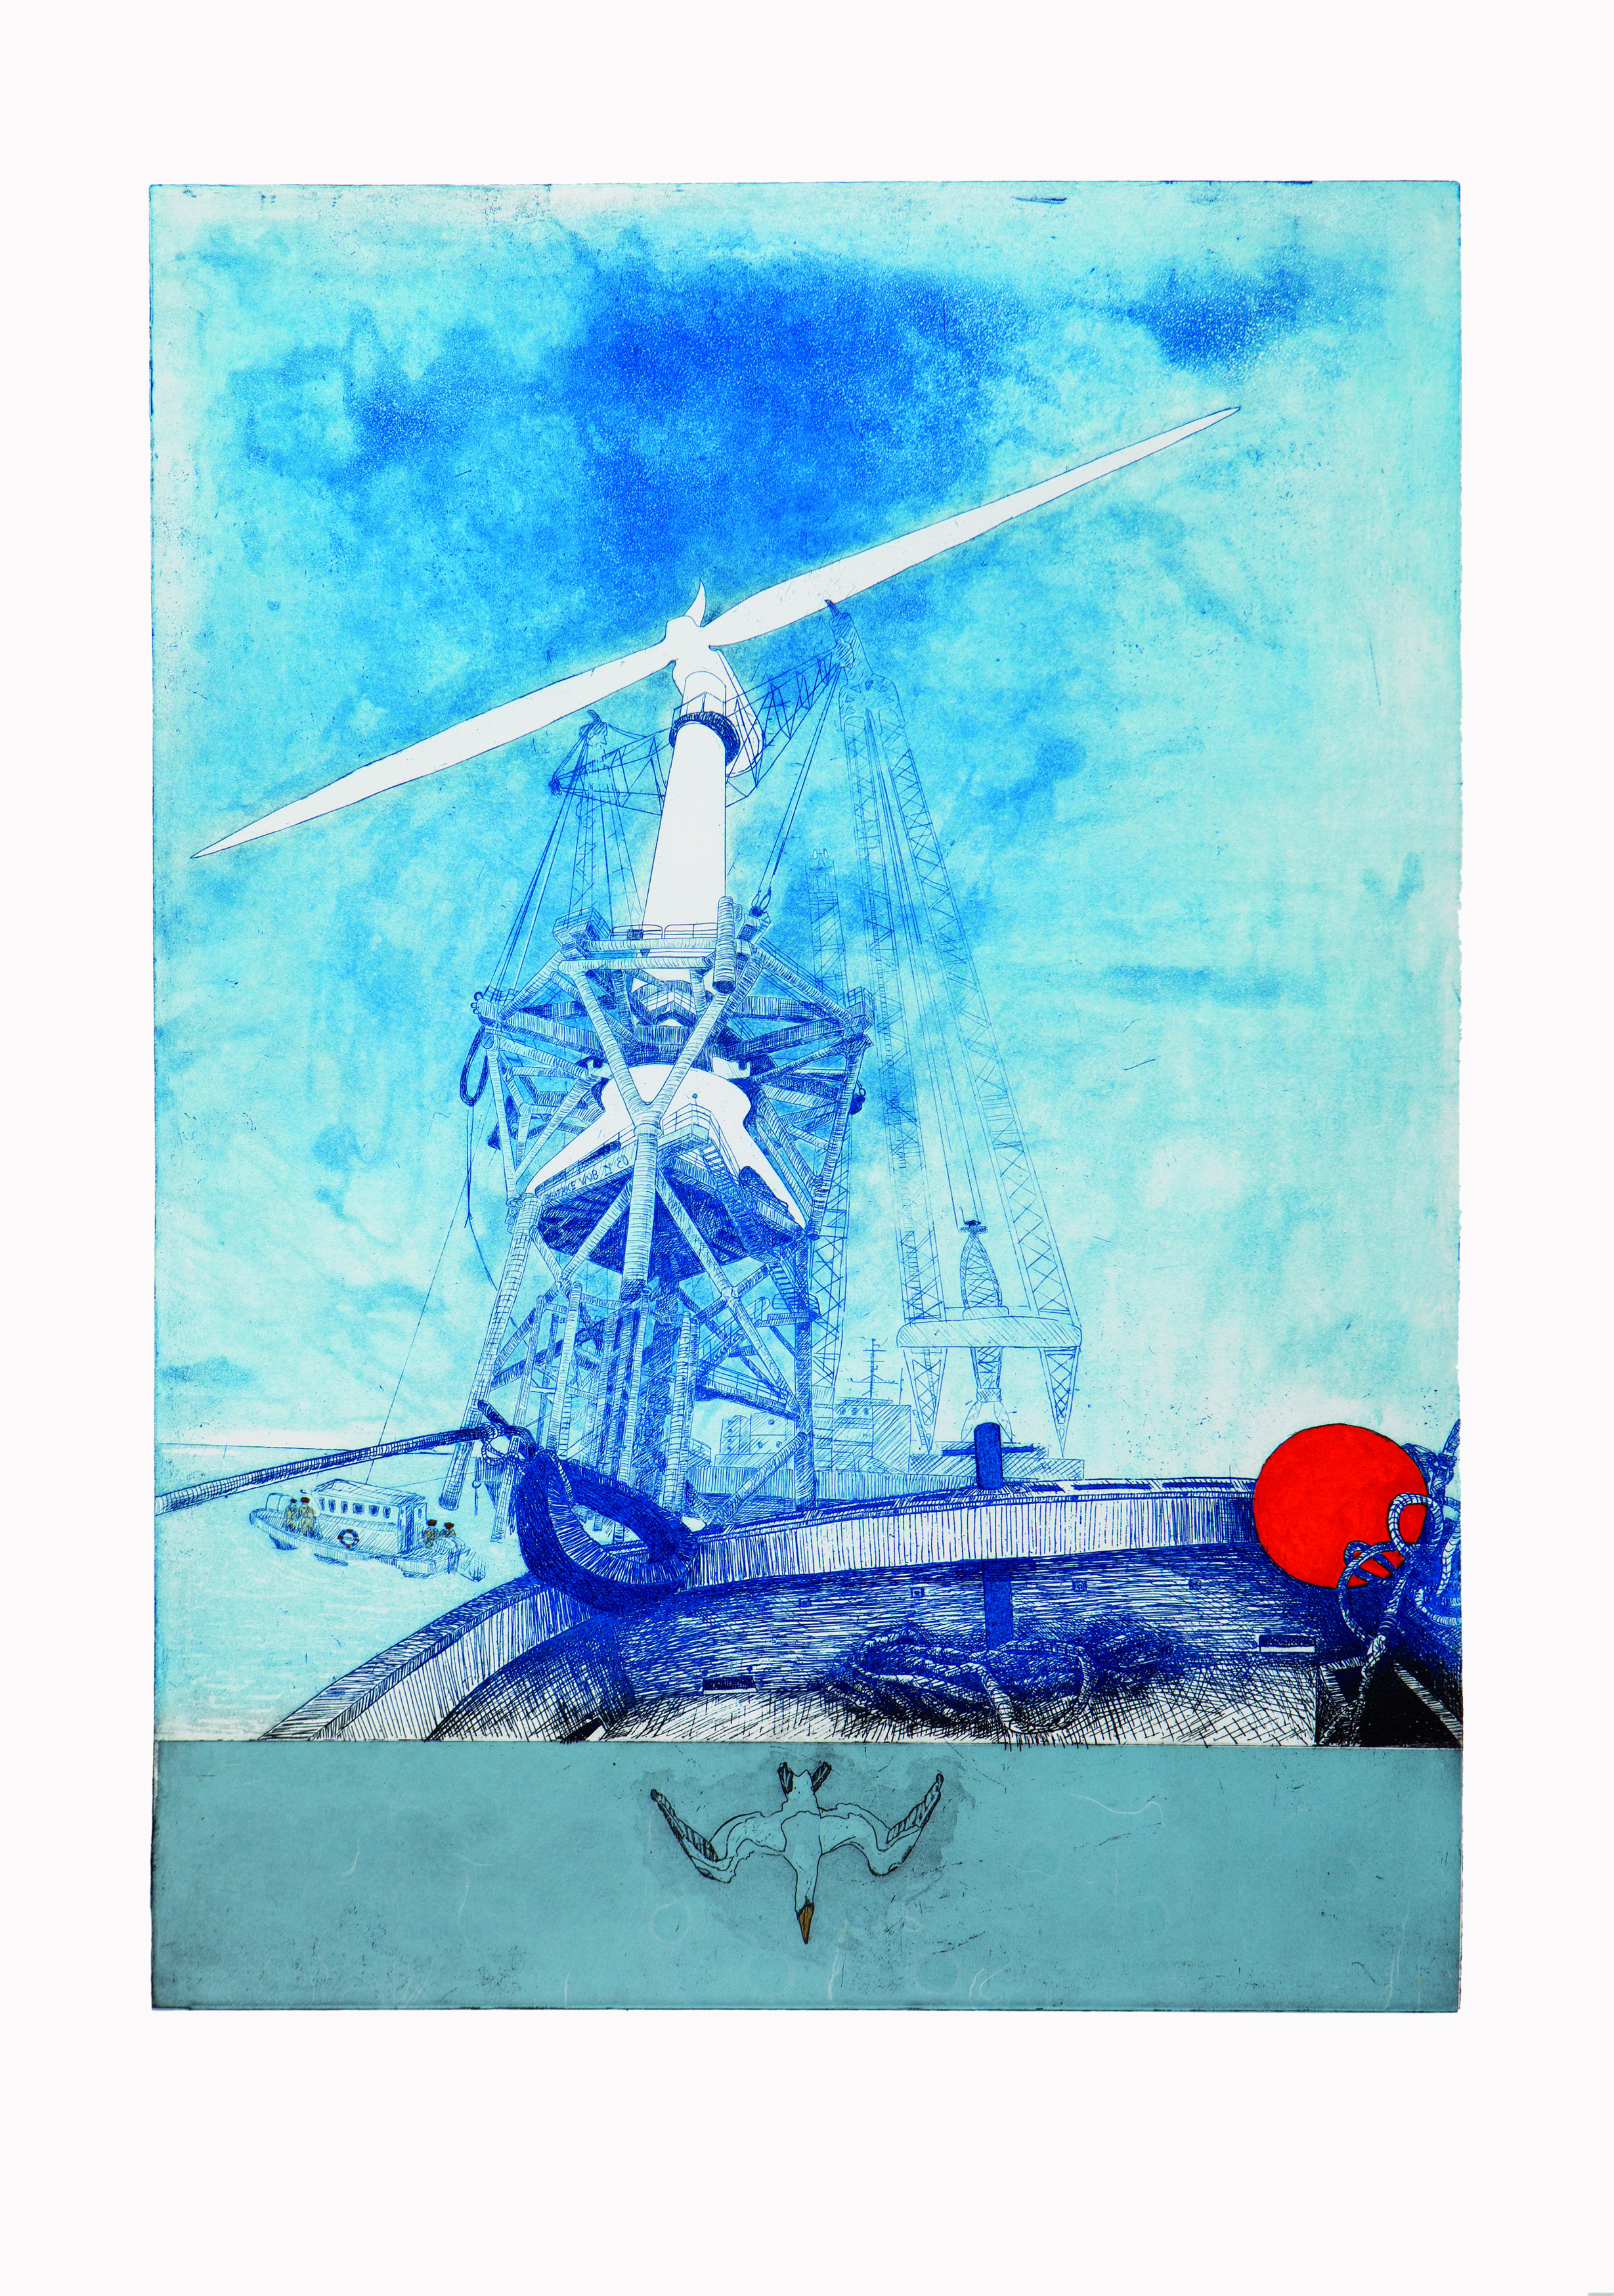 'Beatrice Works Suite No 7 – Assembly offshore, Moray Firth, 2012', edition 20, colour etching, chine collé and hand watercolour, 420mm x 300mm © Sue Jane Taylor. Photographer: Fin Macrae